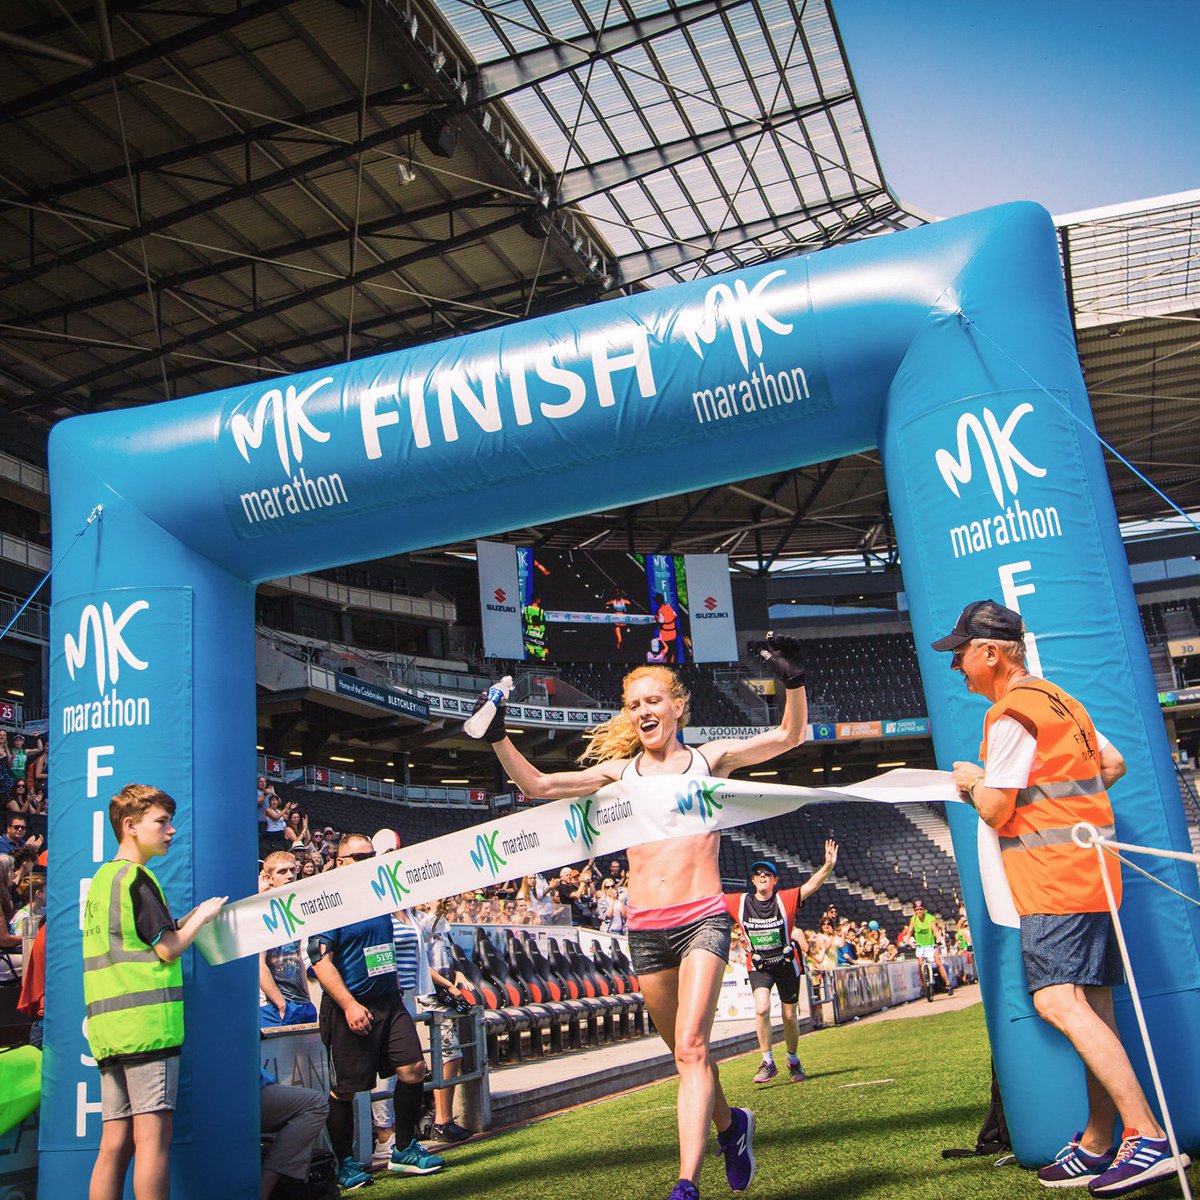 Preparations are well underway for the #MKMarathon on Monday! We can't wait to see you all for the Stadium finish!📷📷